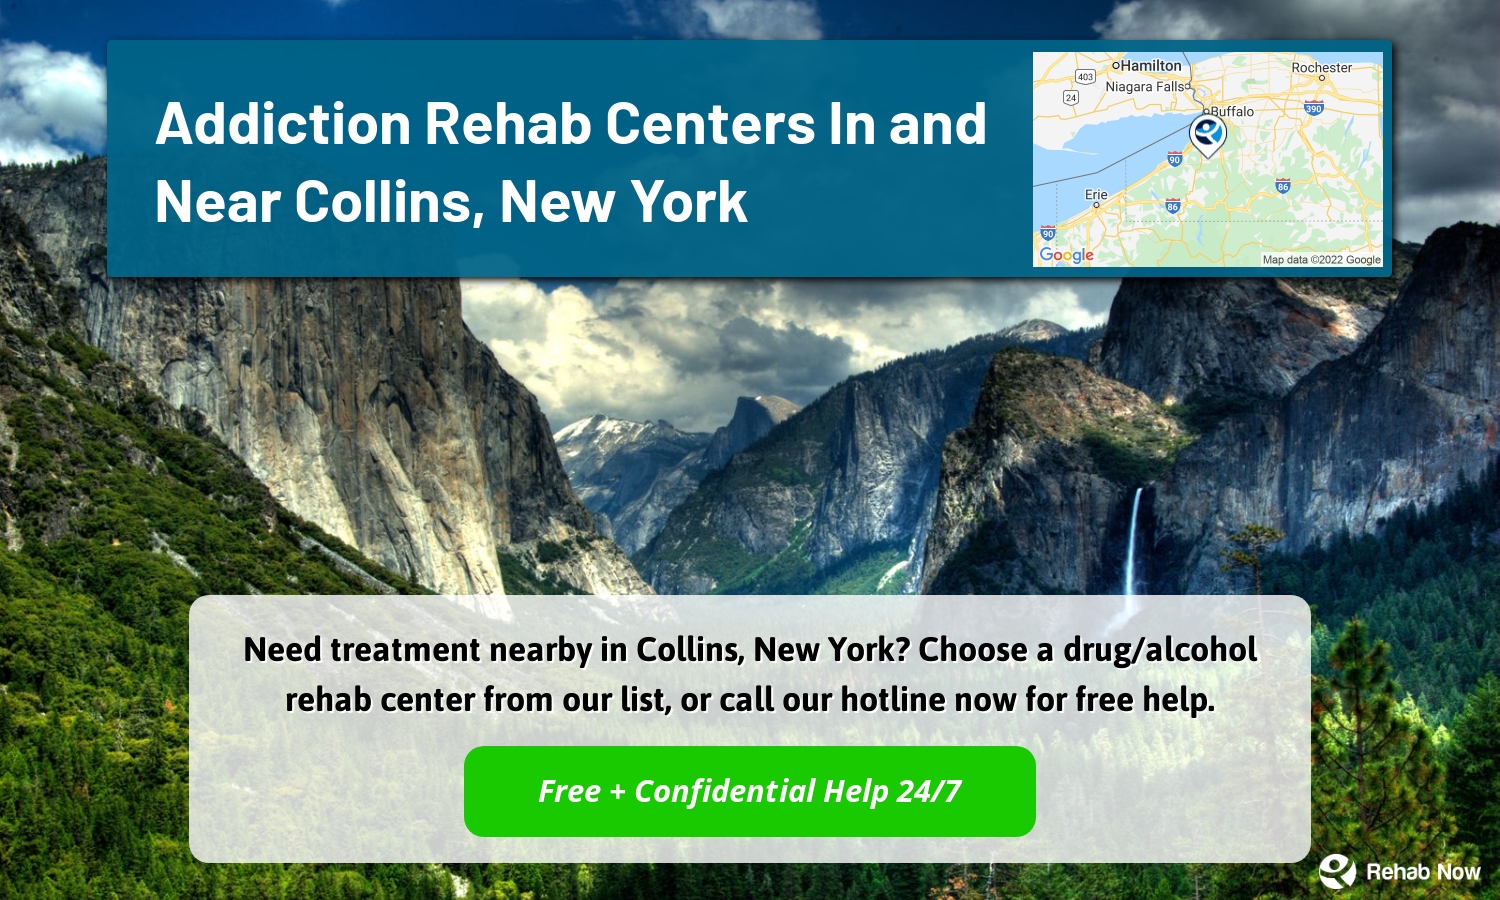 Need treatment nearby in Collins, New York? Choose a drug/alcohol rehab center from our list, or call our hotline now for free help.